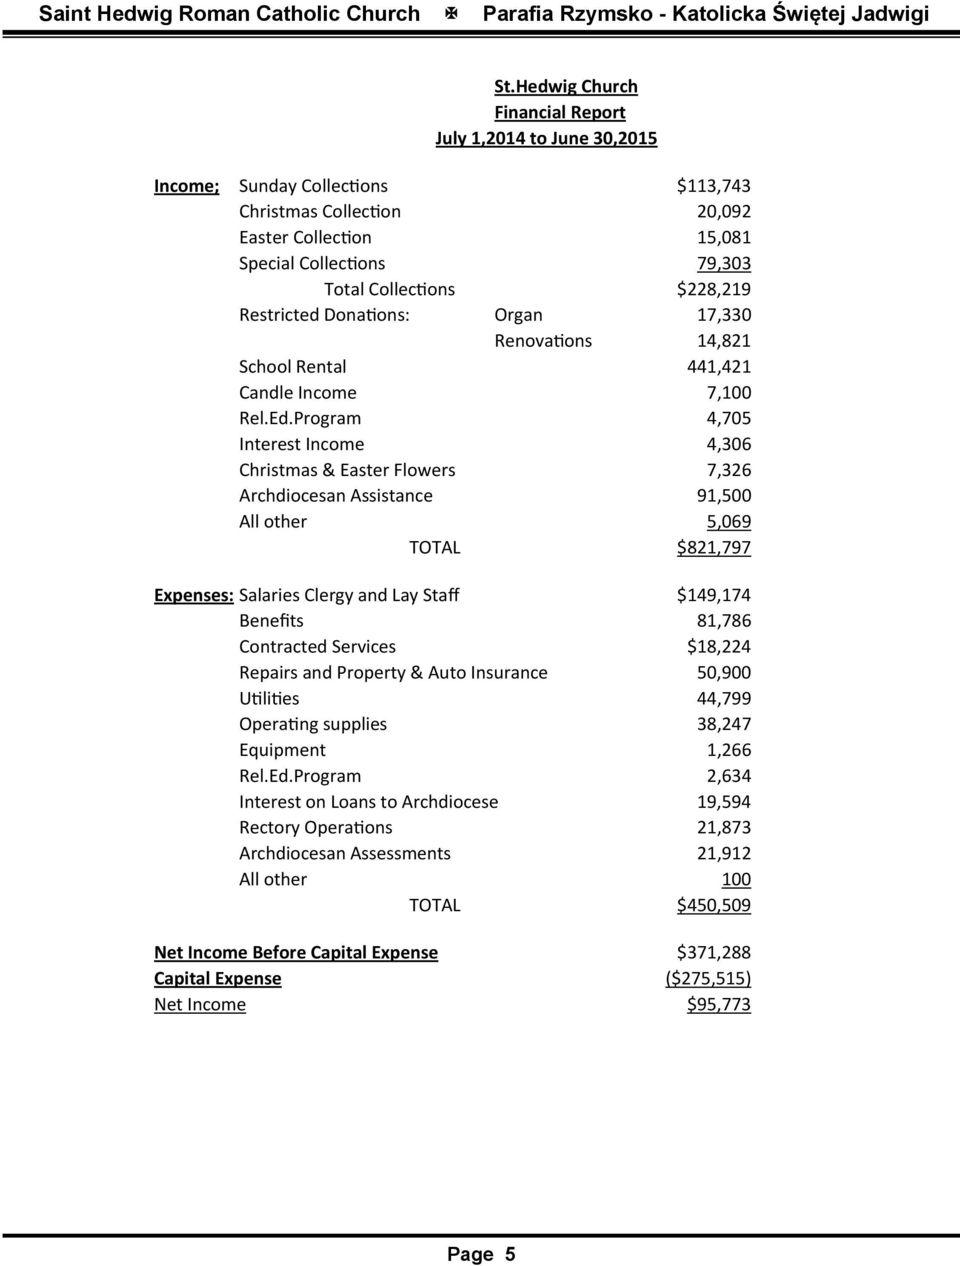 Program 4,705 Interest Income 4,306 Christmas & Easter Flowers 7,326 Archdiocesan Assistance 91,500 All other 5,069 TOTAL $821,797 Expenses: Salaries Clergy and Lay Staff $149,174 Benefits 81,786